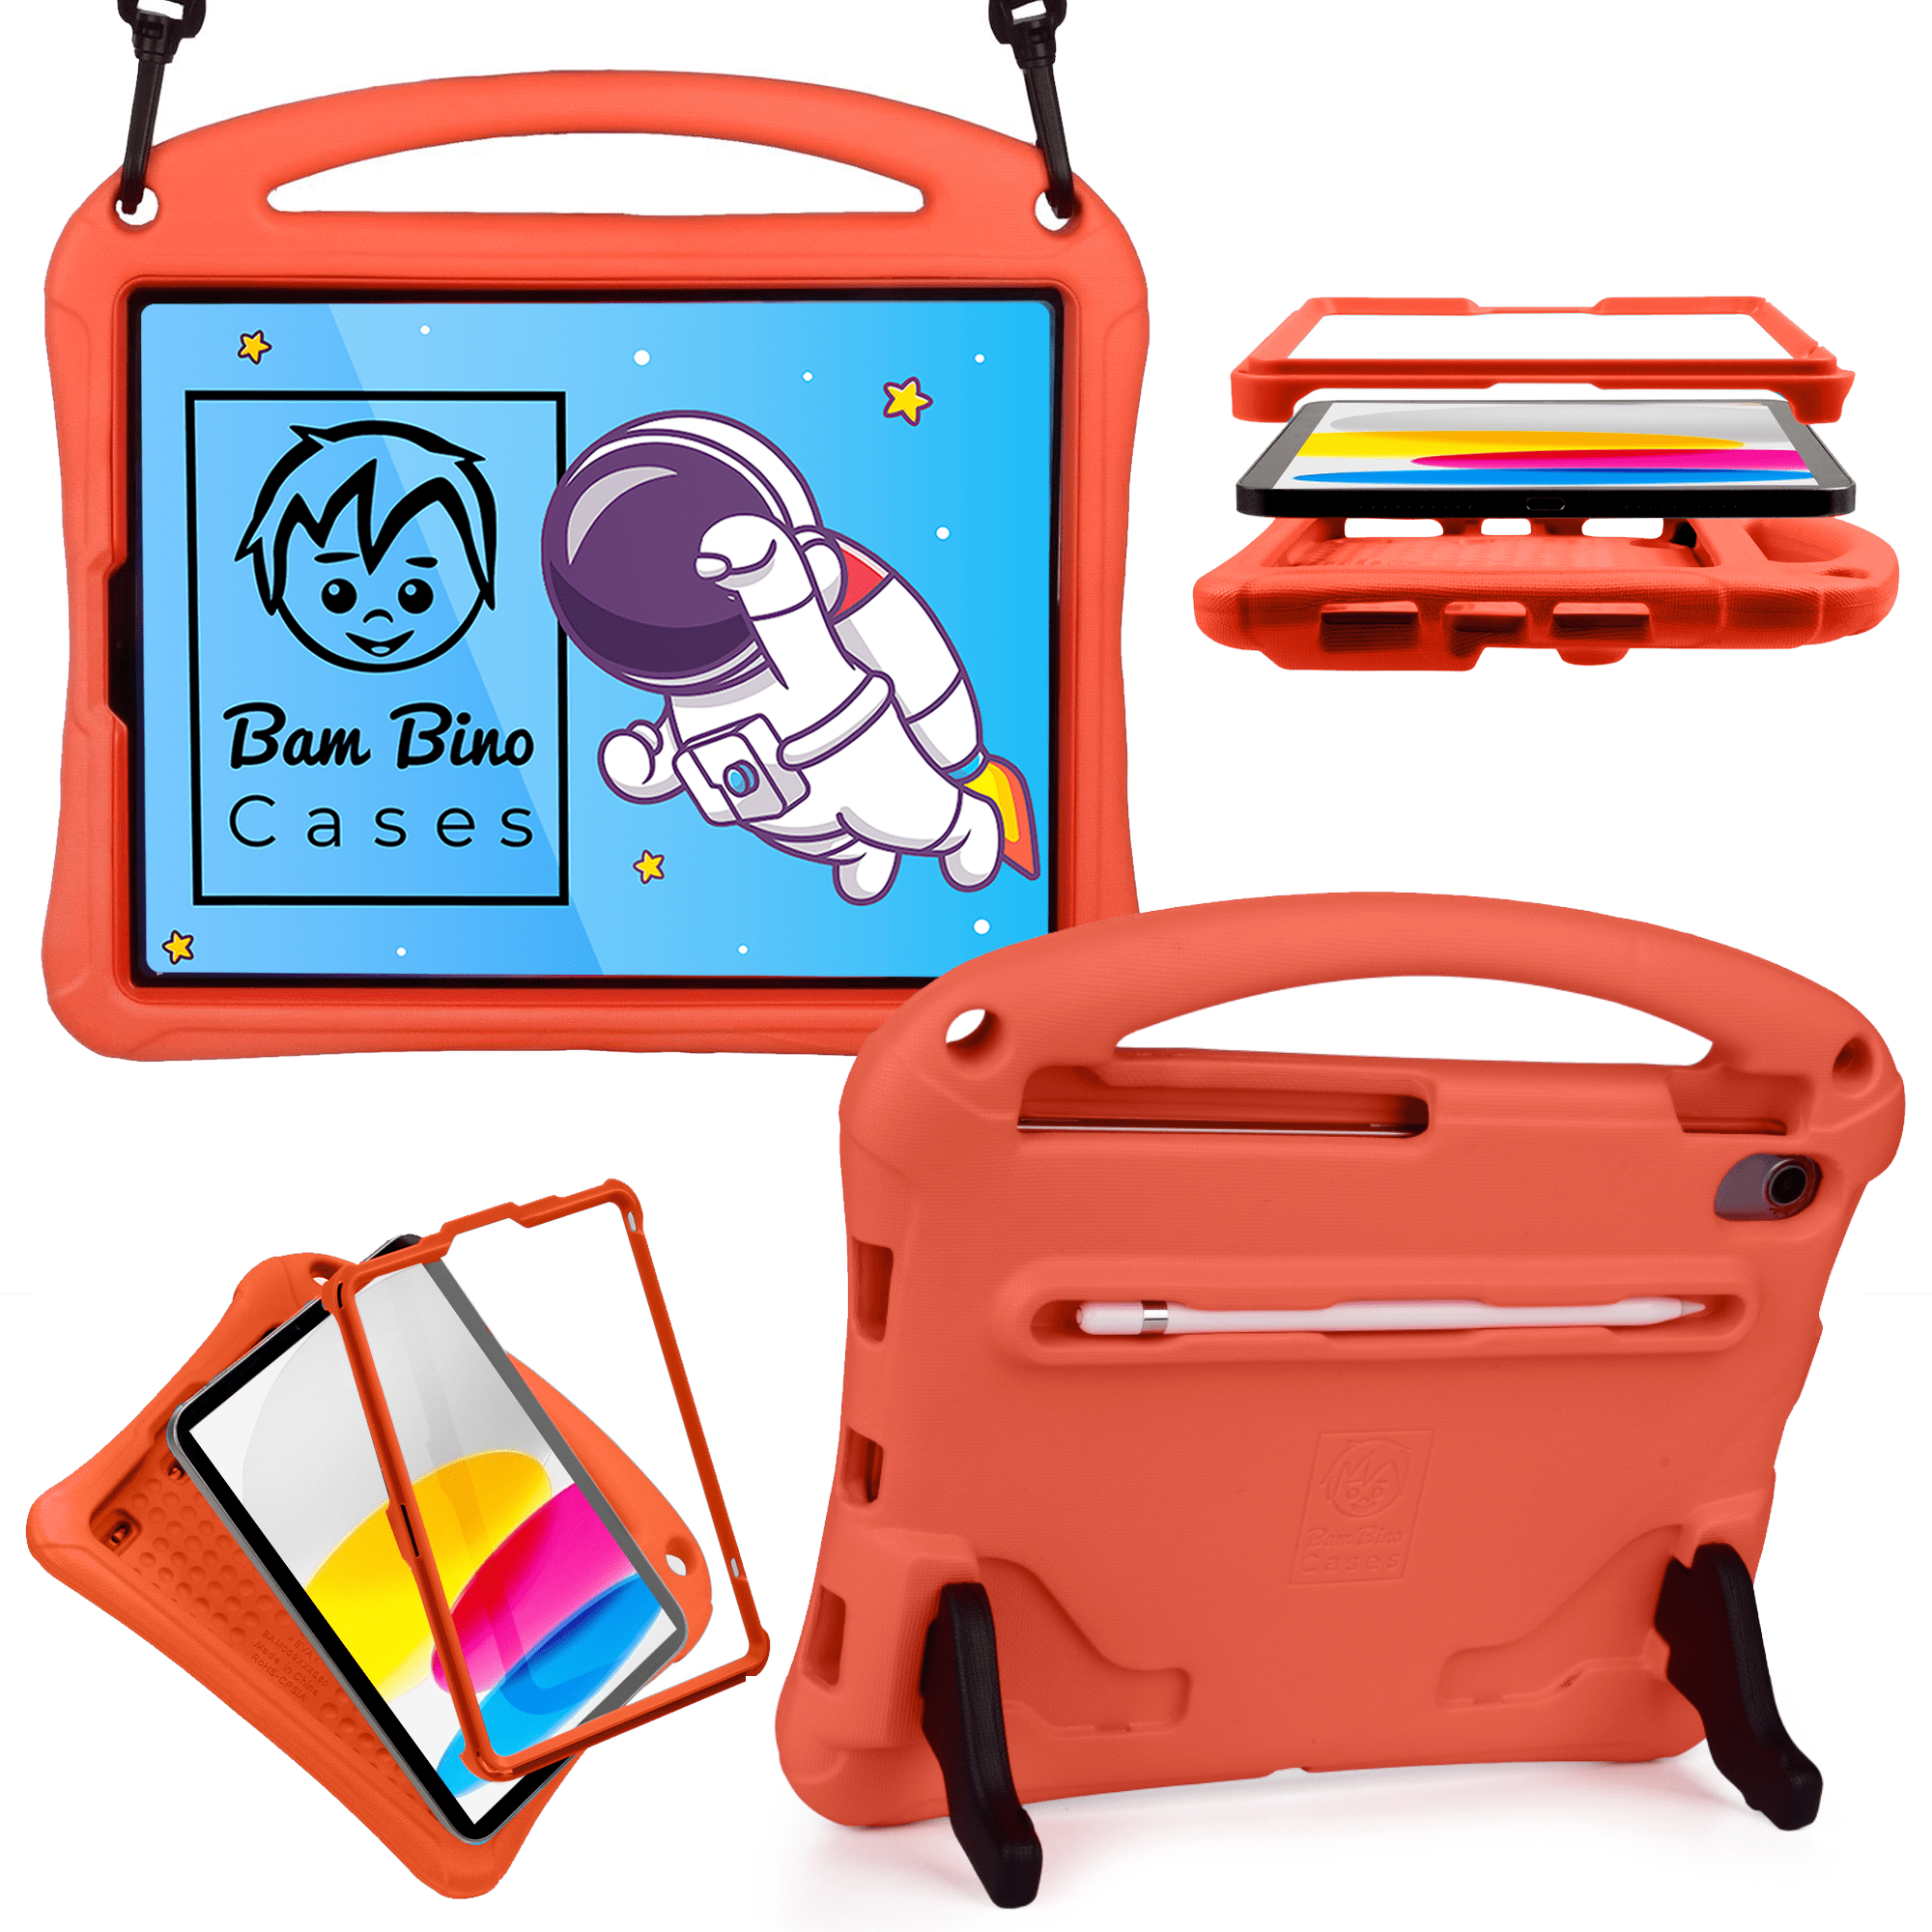 Bam Bino Space Suit Super Rugged Kids case with Screen Guard for 9.7" iPad 6th / 5th Gen, iPad Pro 9.7, iPad Air 2 / Air 1